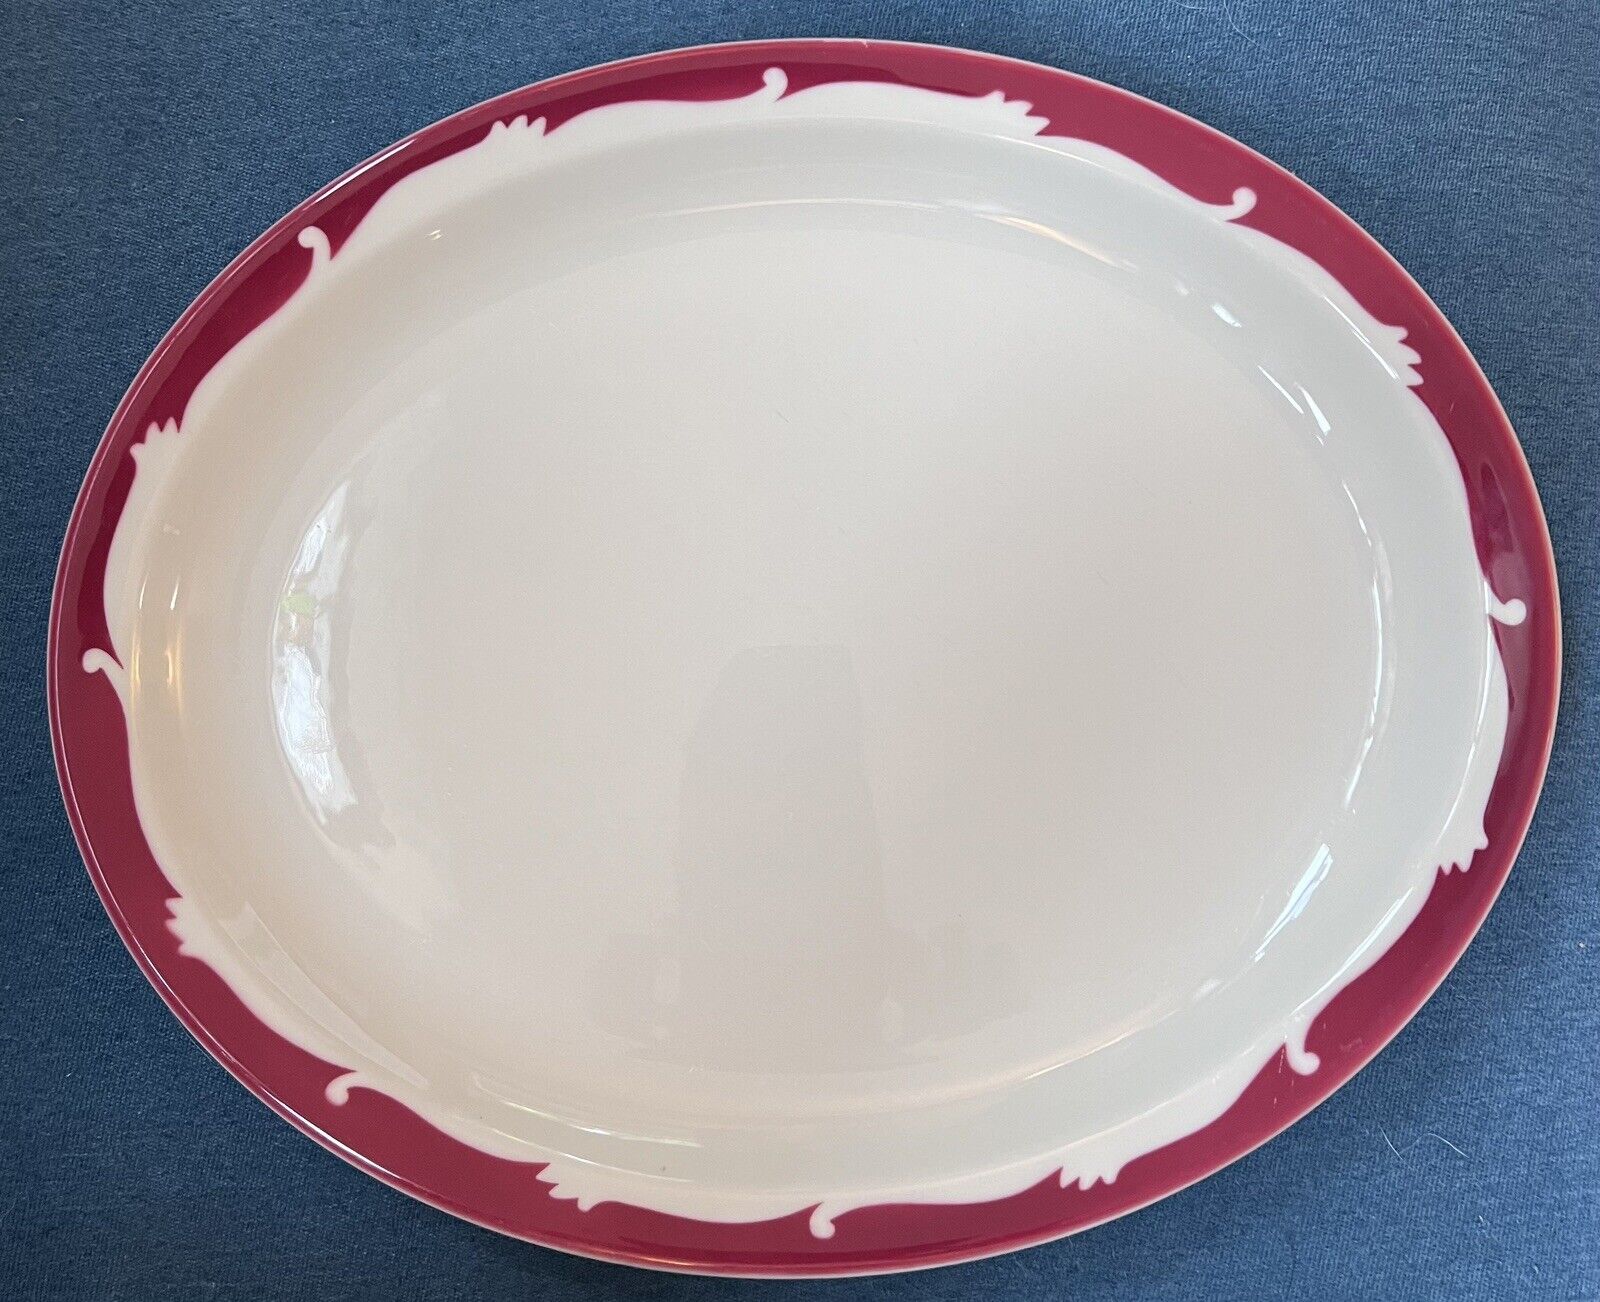 Syracuse China USA Restaurant Ware Oval Dinner Plate 11 3/8L X 9 1/4”W Airbrush